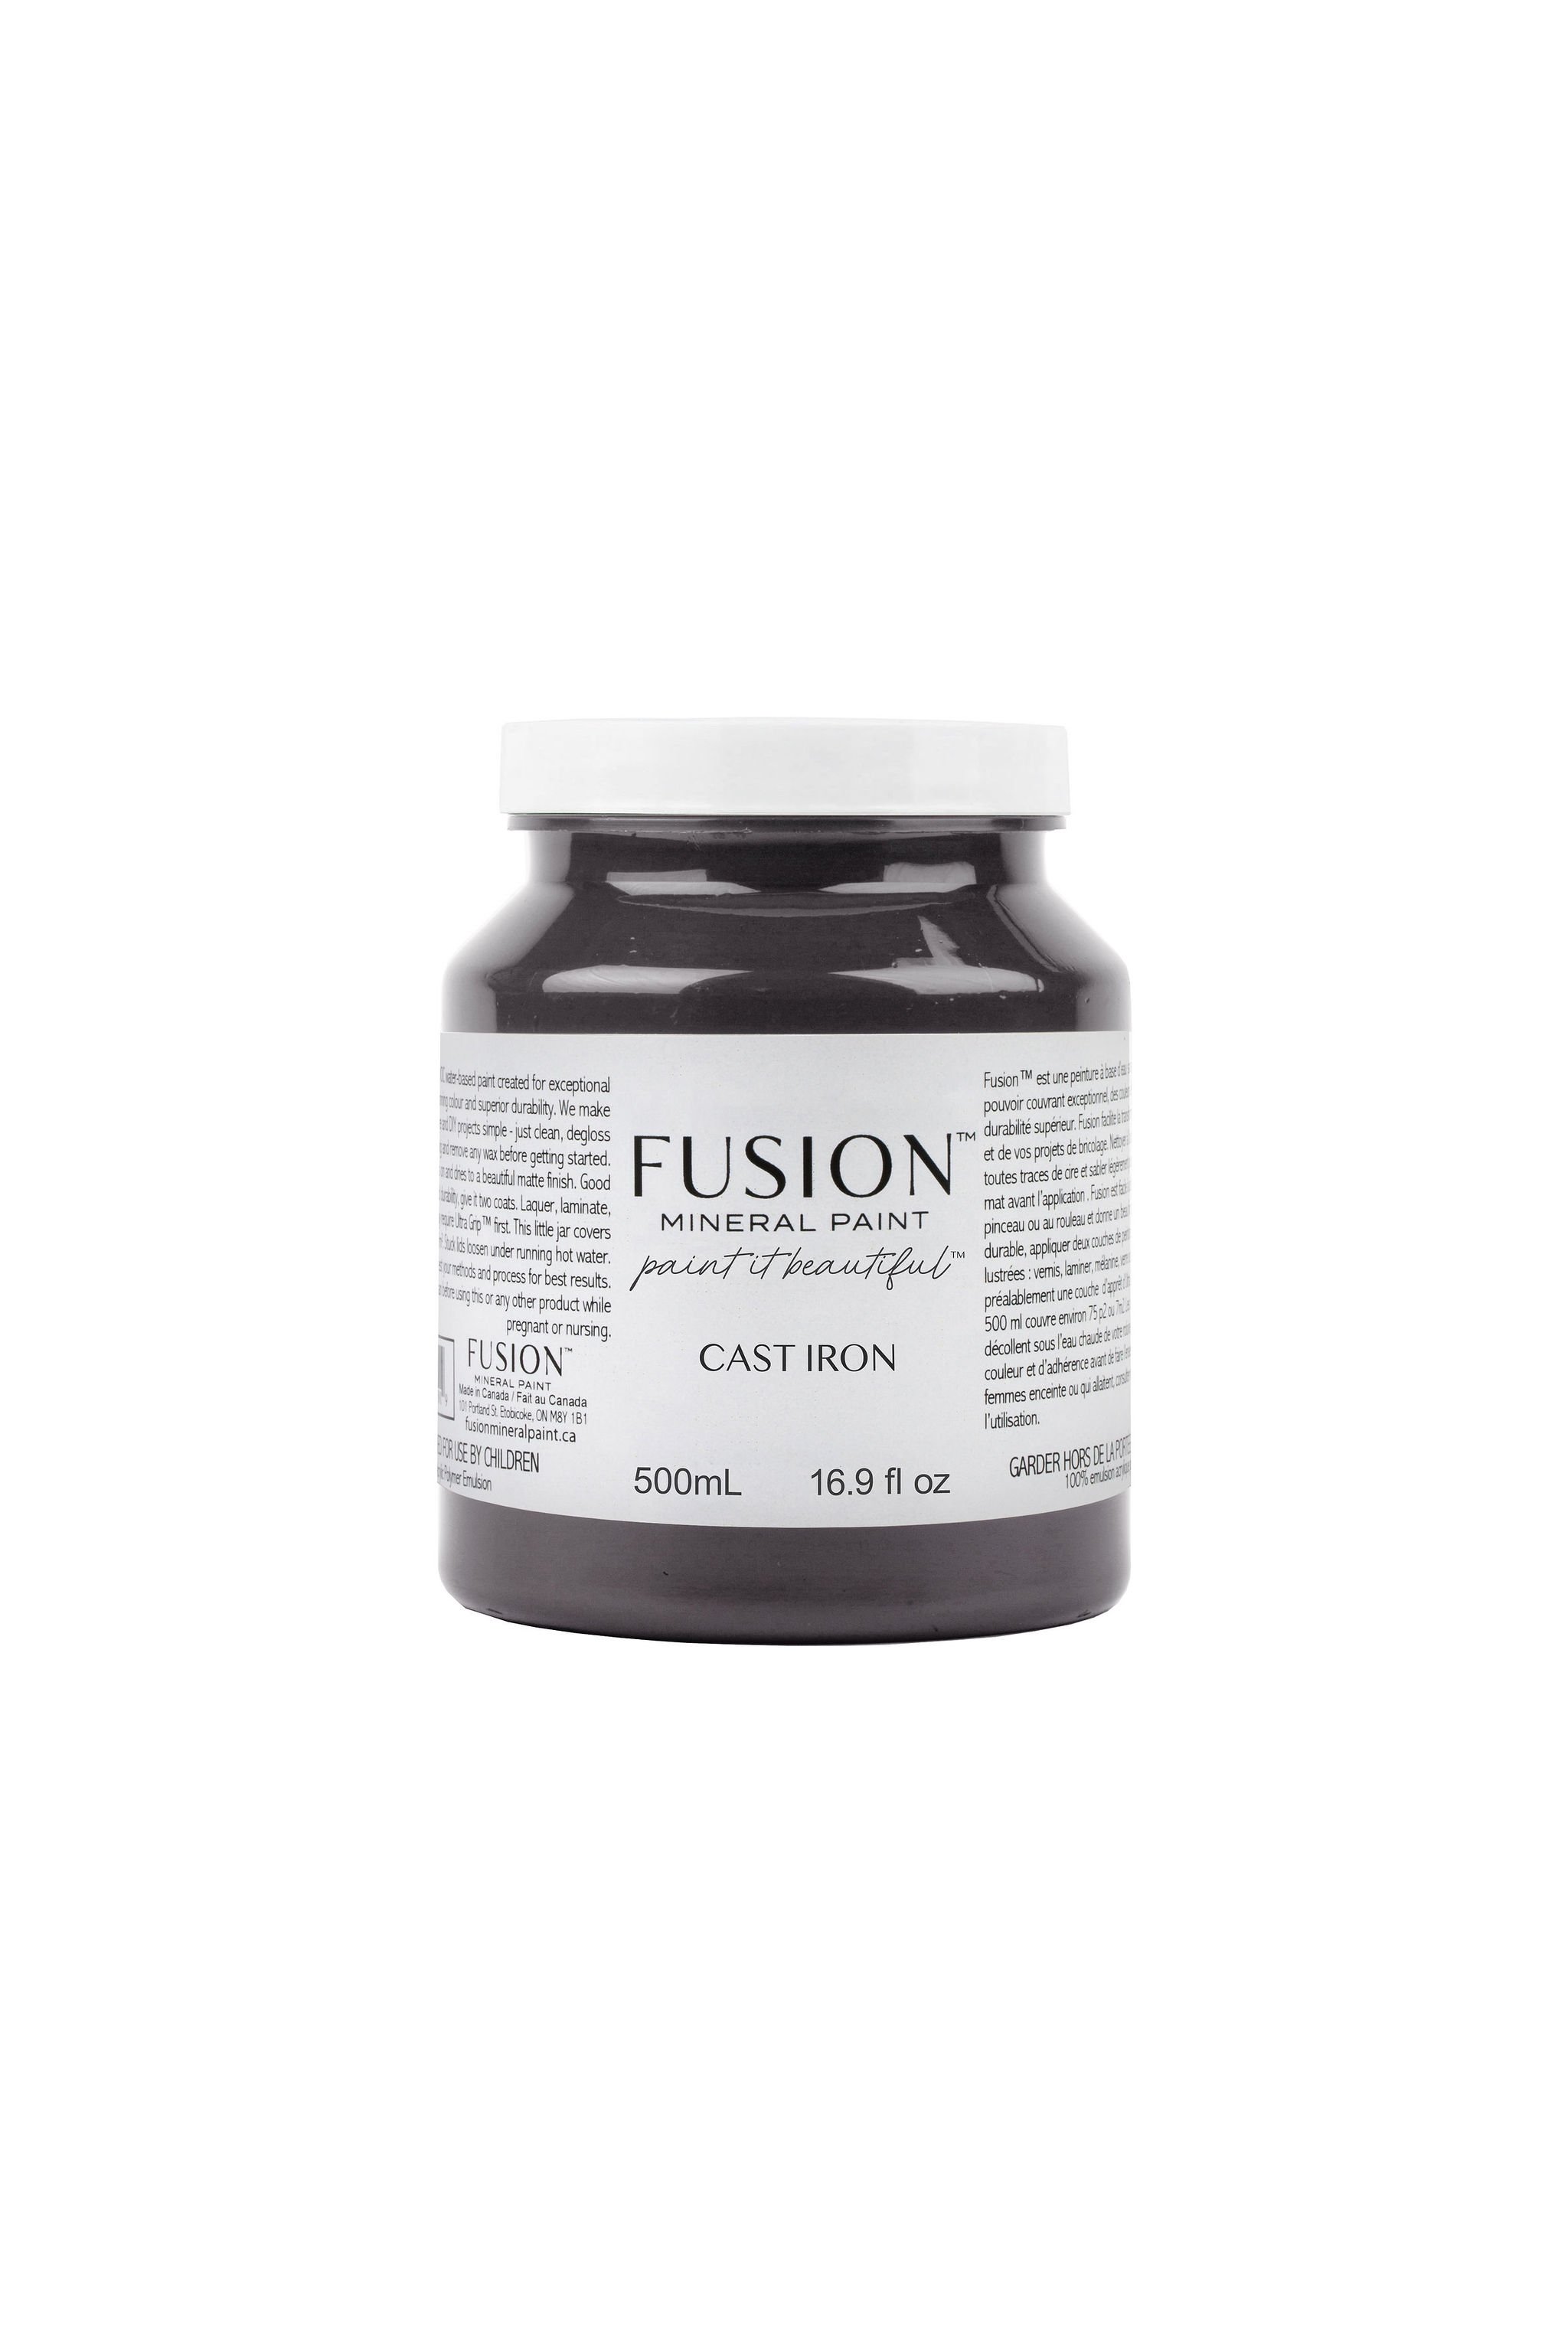 Fusion Mineral Paint UK stockist, Online & In-store